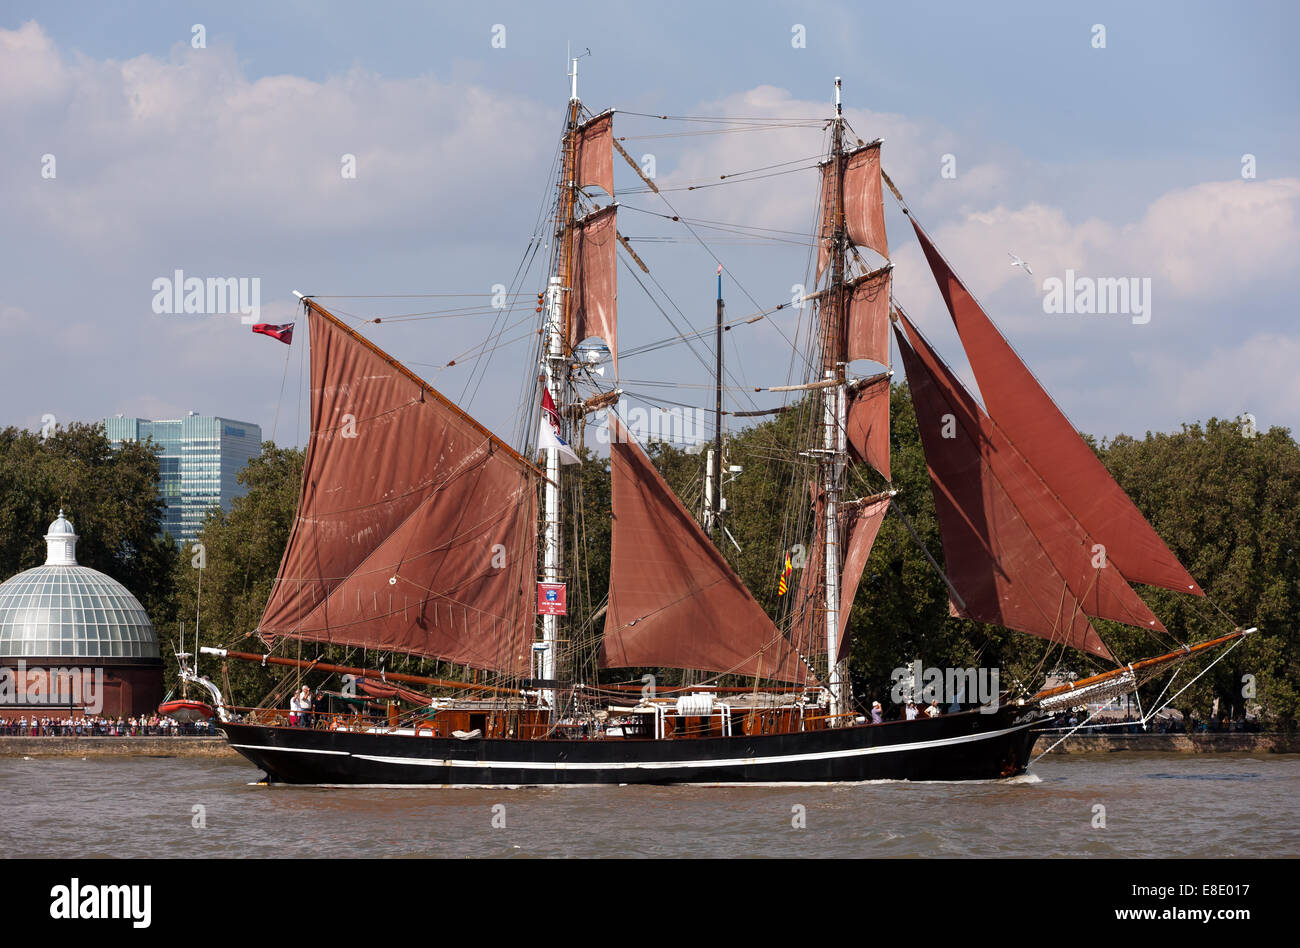 Eye of the Wind, taking part in the parade of sail, during the Tall Ships Festival, Greenwich. Stock Photo